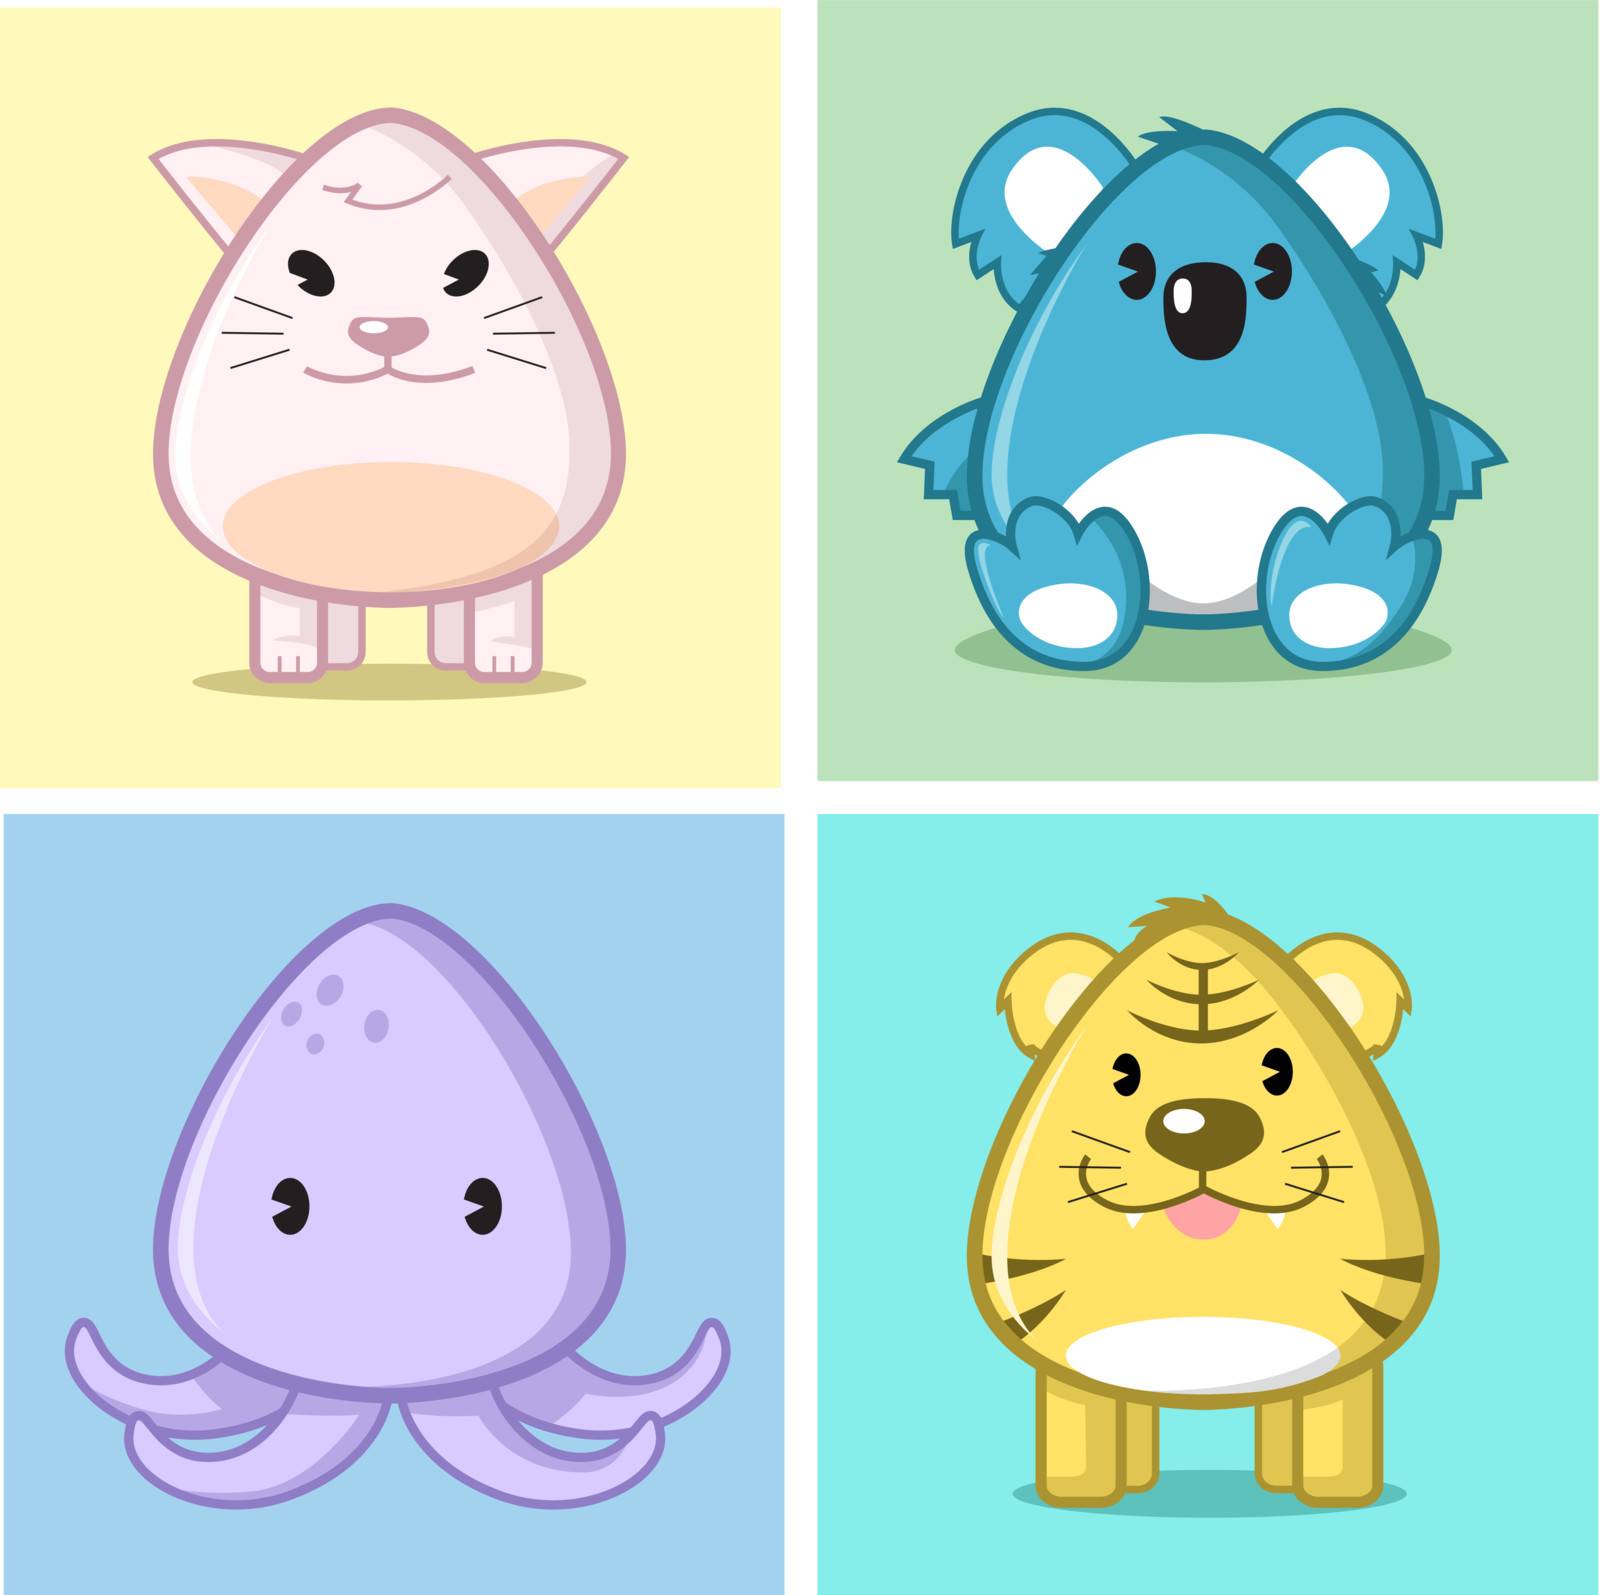 Image of animal (cat, koala, squid, tiger) in caricature cartoon style with soft and cute color on nice colored background